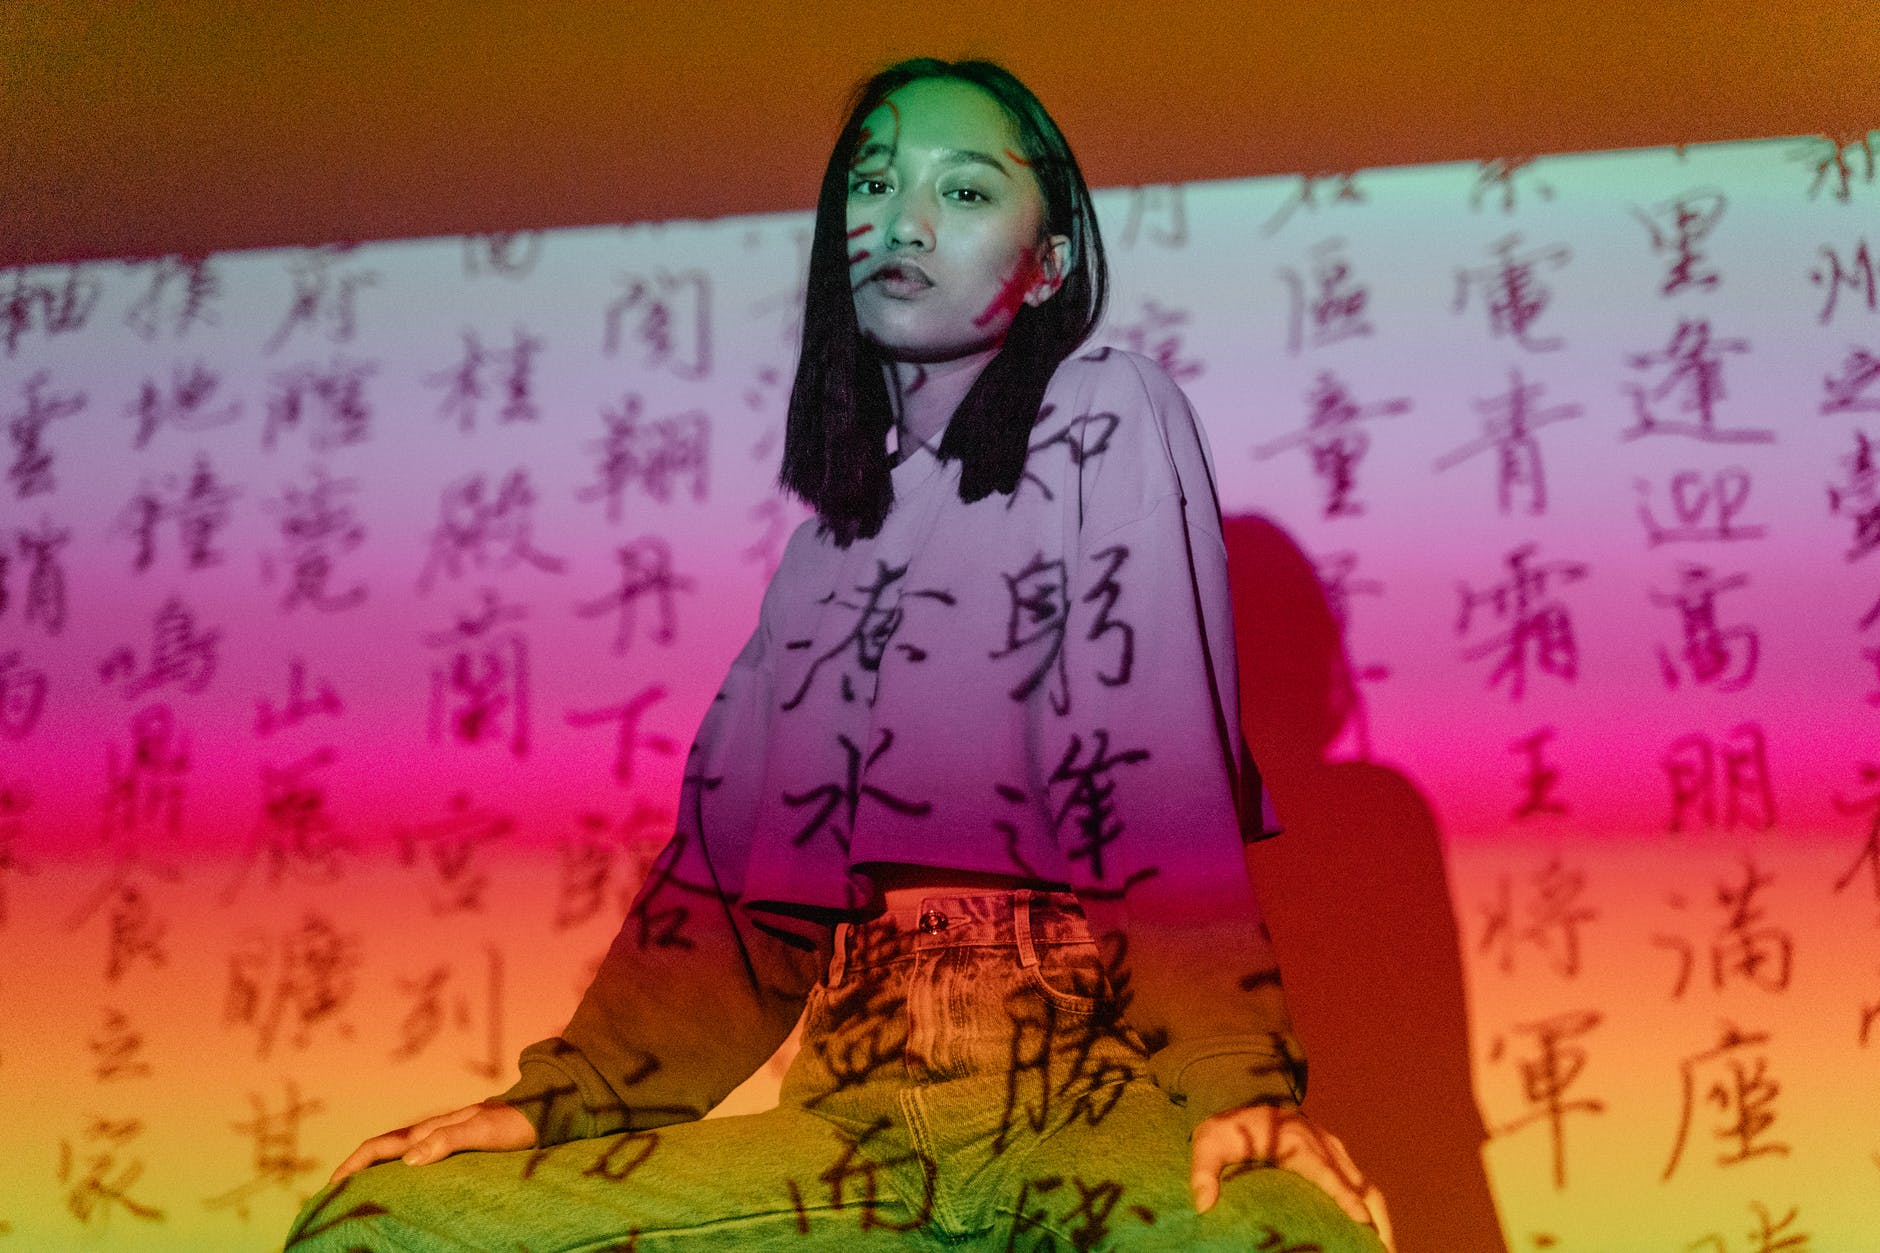 chinese characters overlaying a woman in purple long sleeves